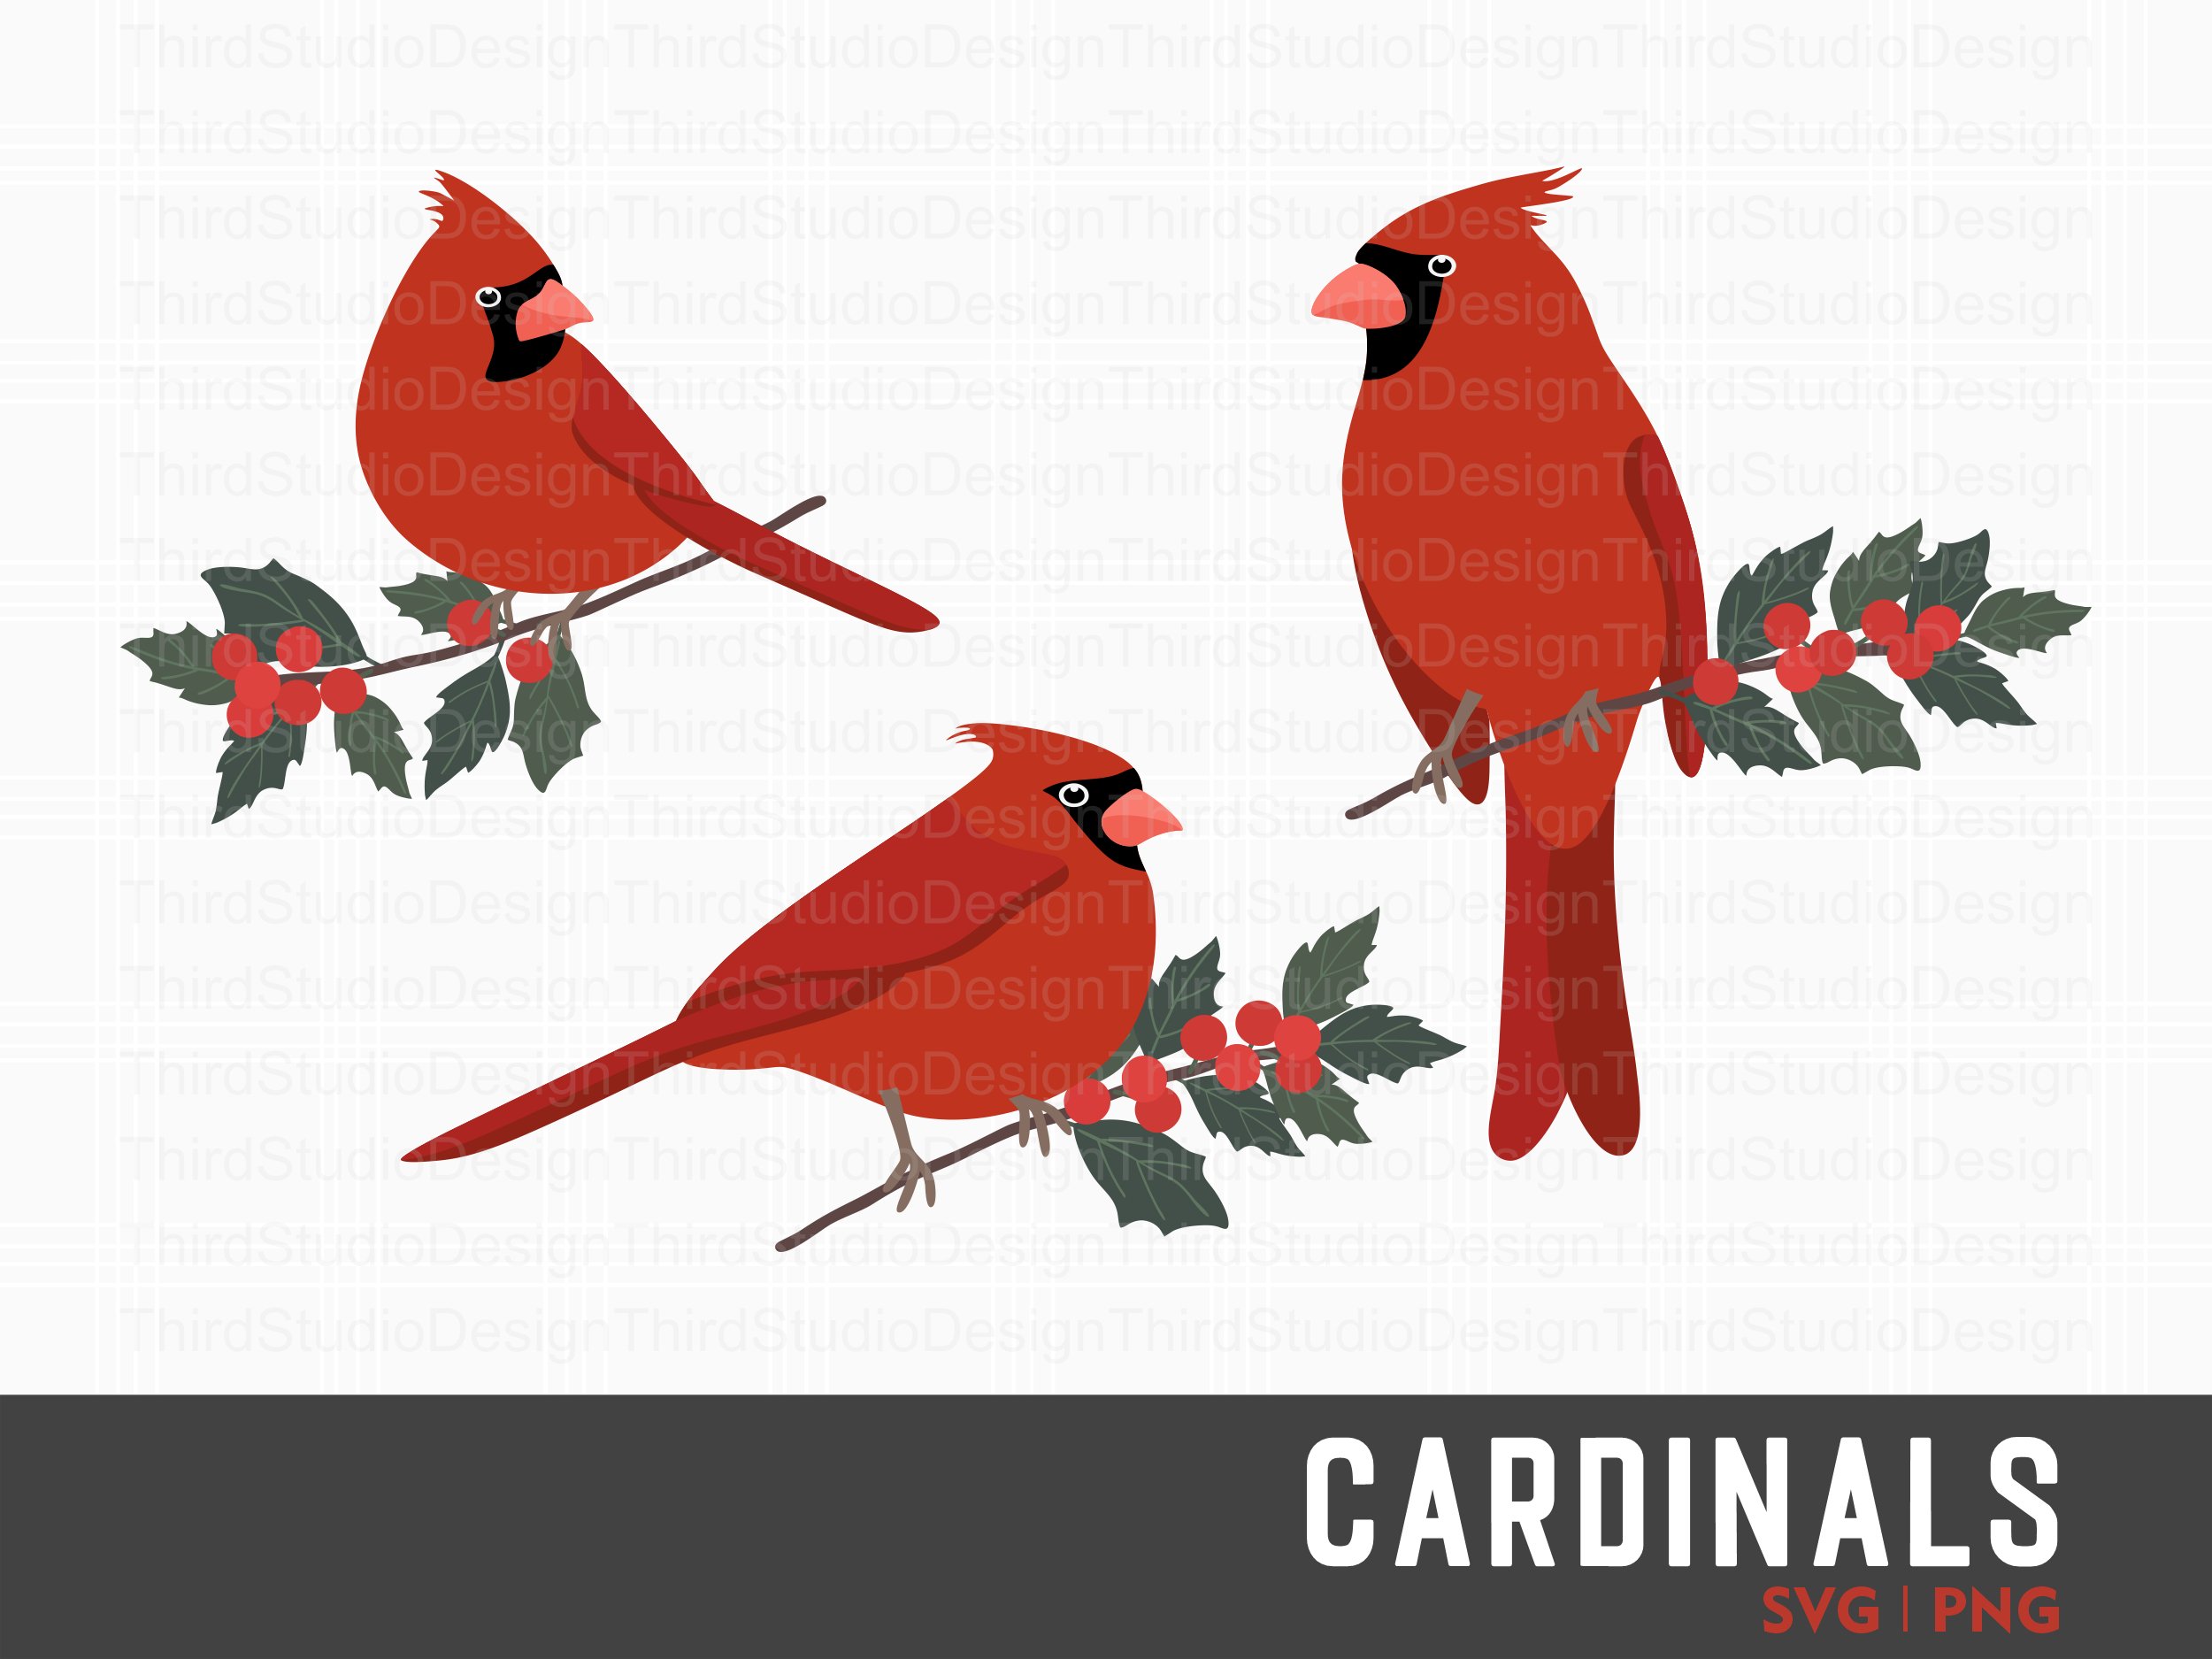 Three cardinal birds sitting on a branch with holly.